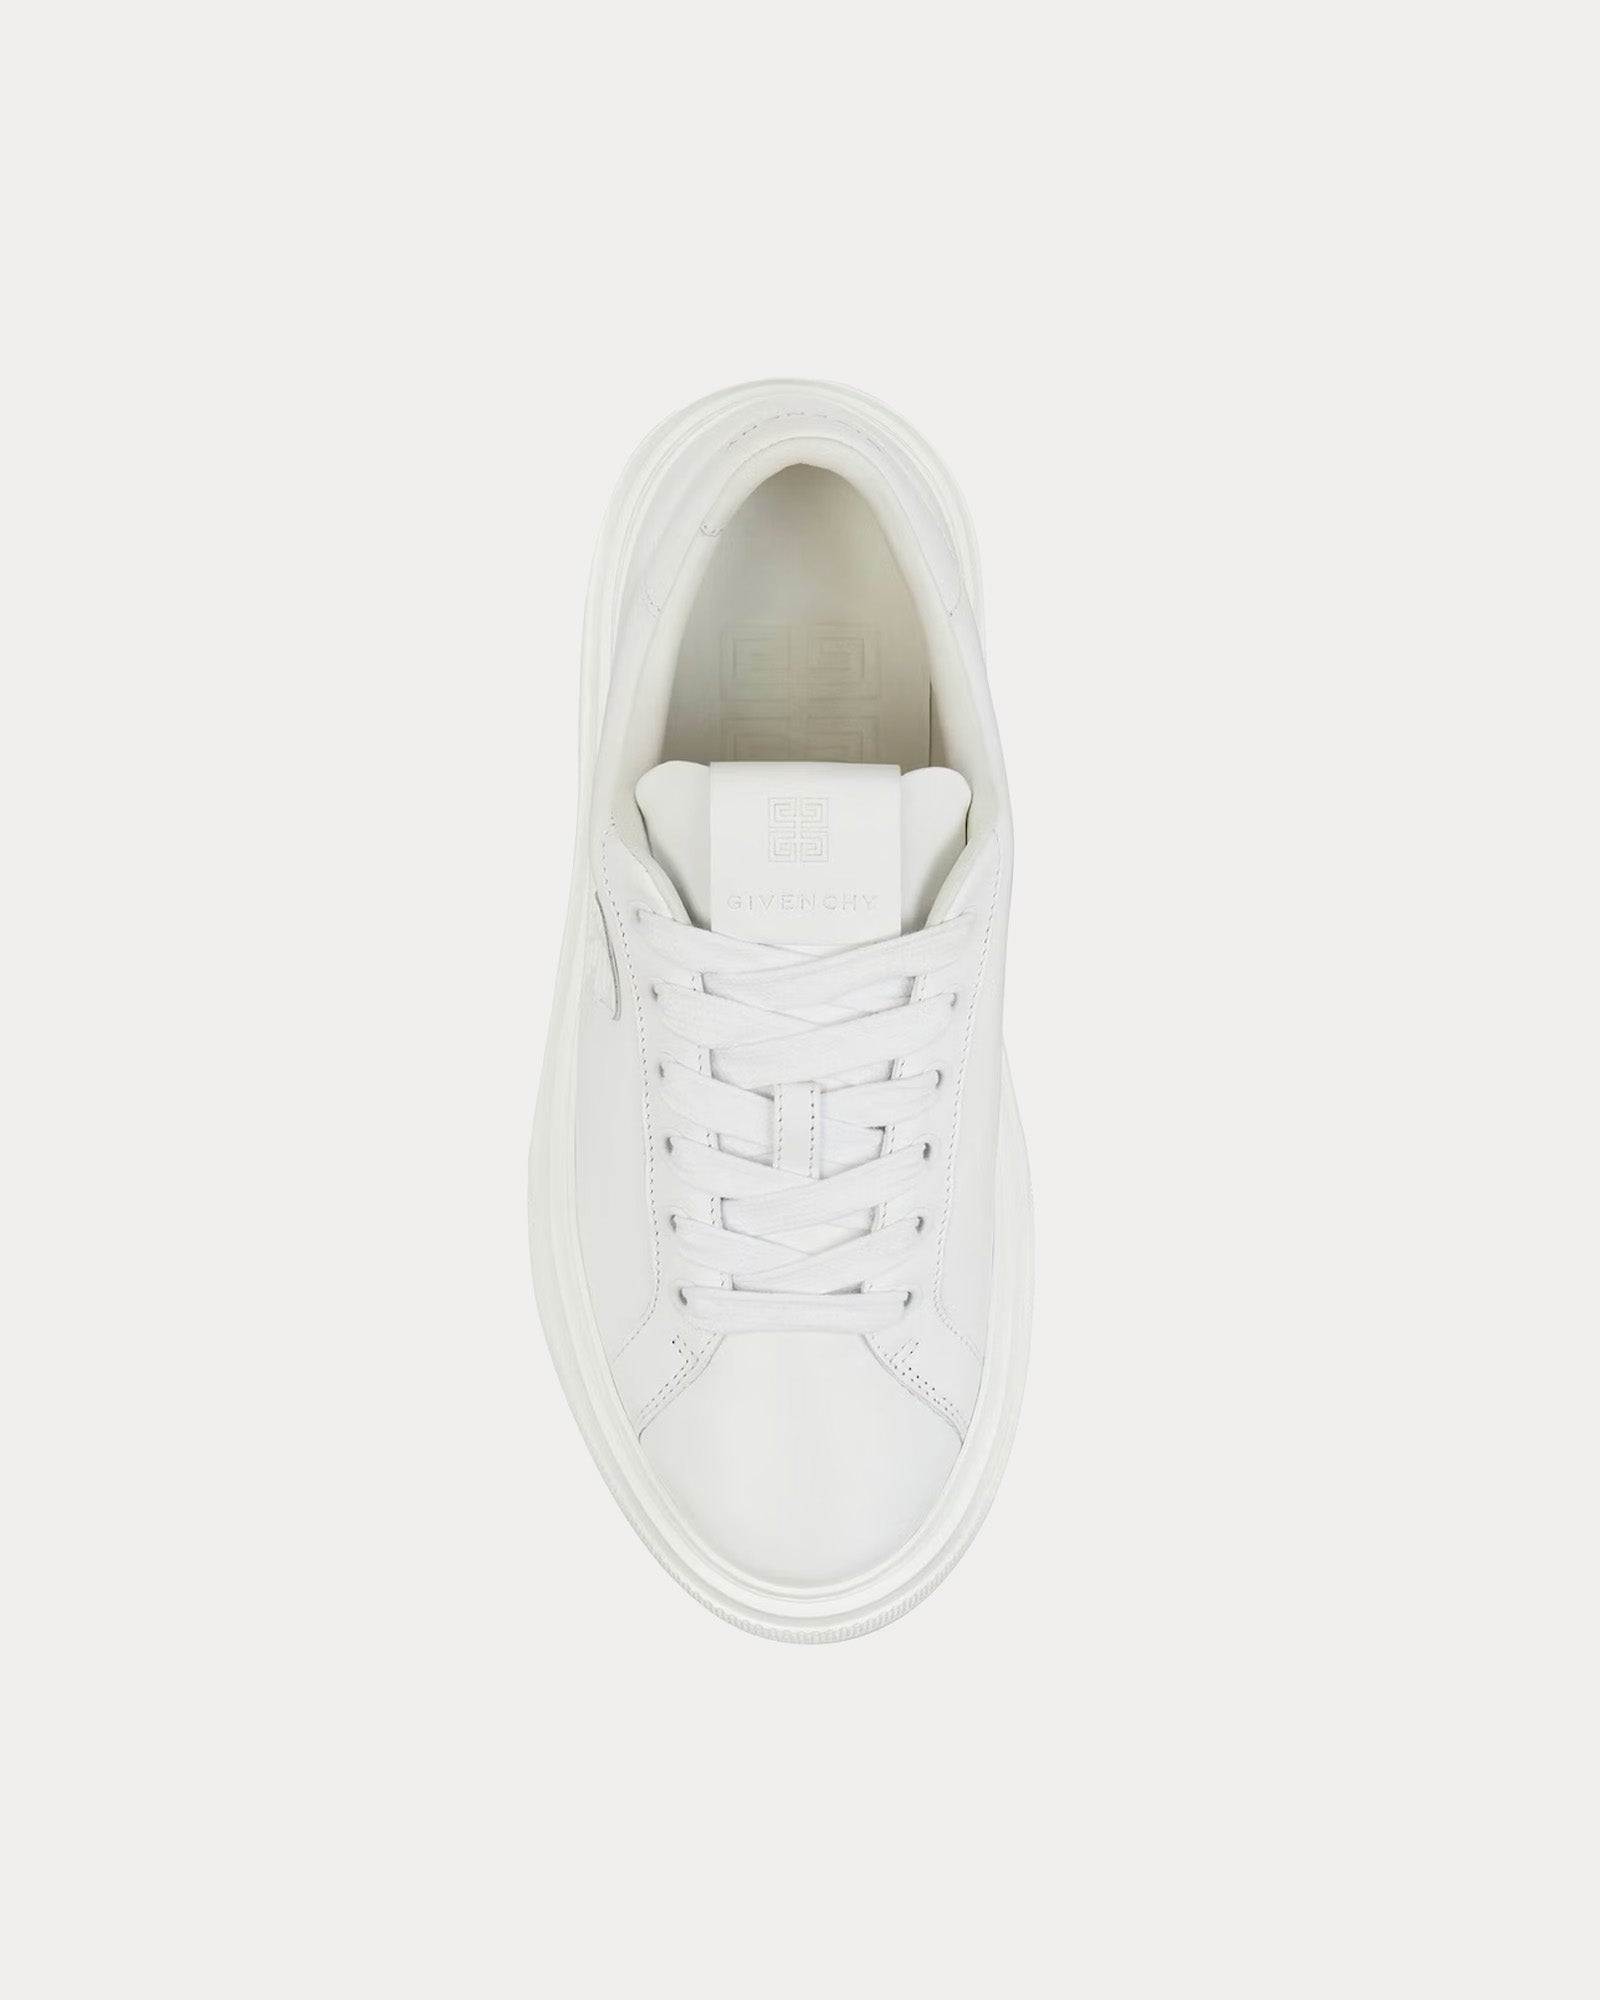 Givenchy - City Platform Leather White Low Top Sneakers